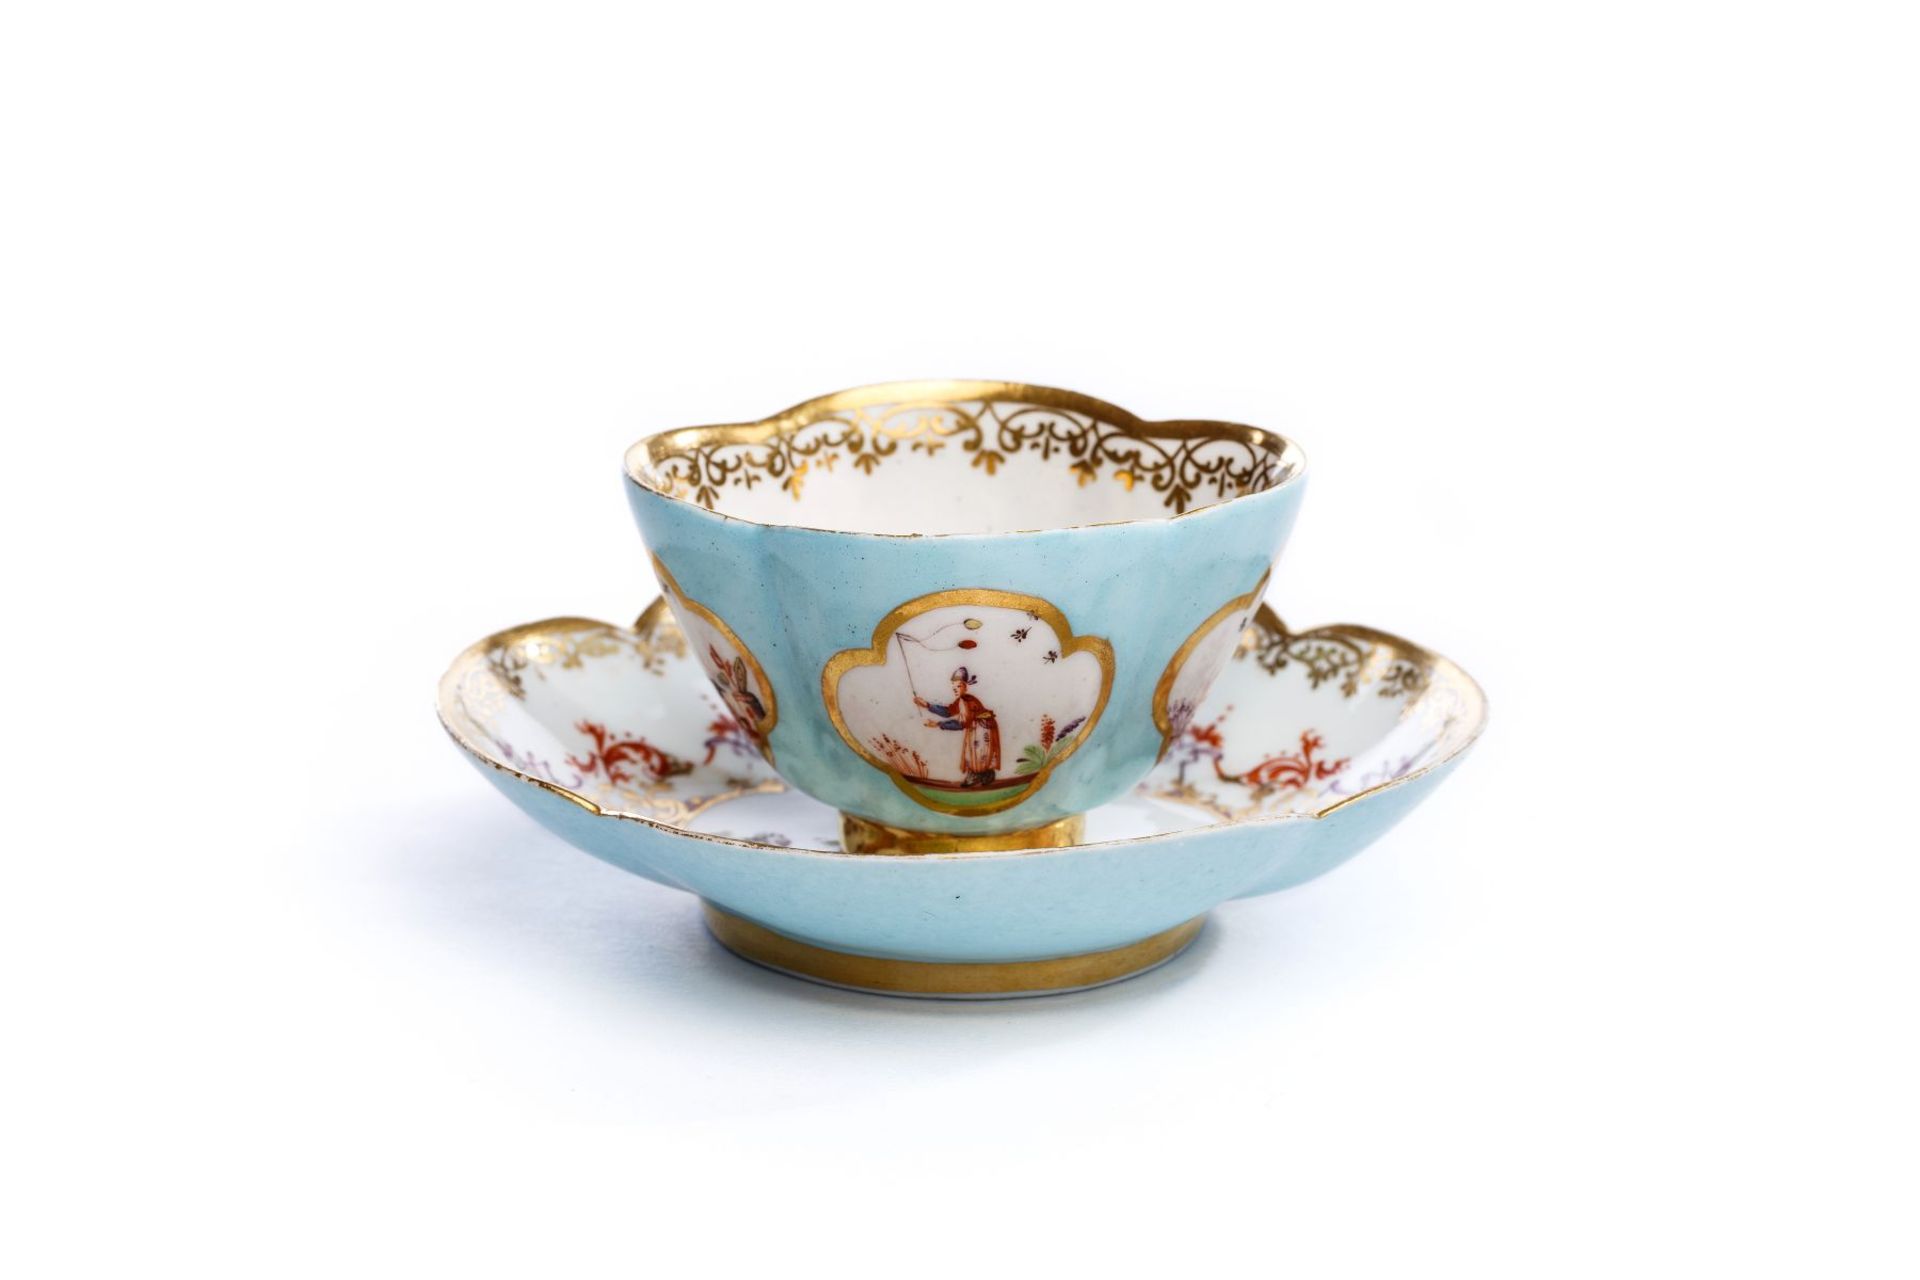 Bowl with saucer, Meissen 1720/30 - Image 2 of 3